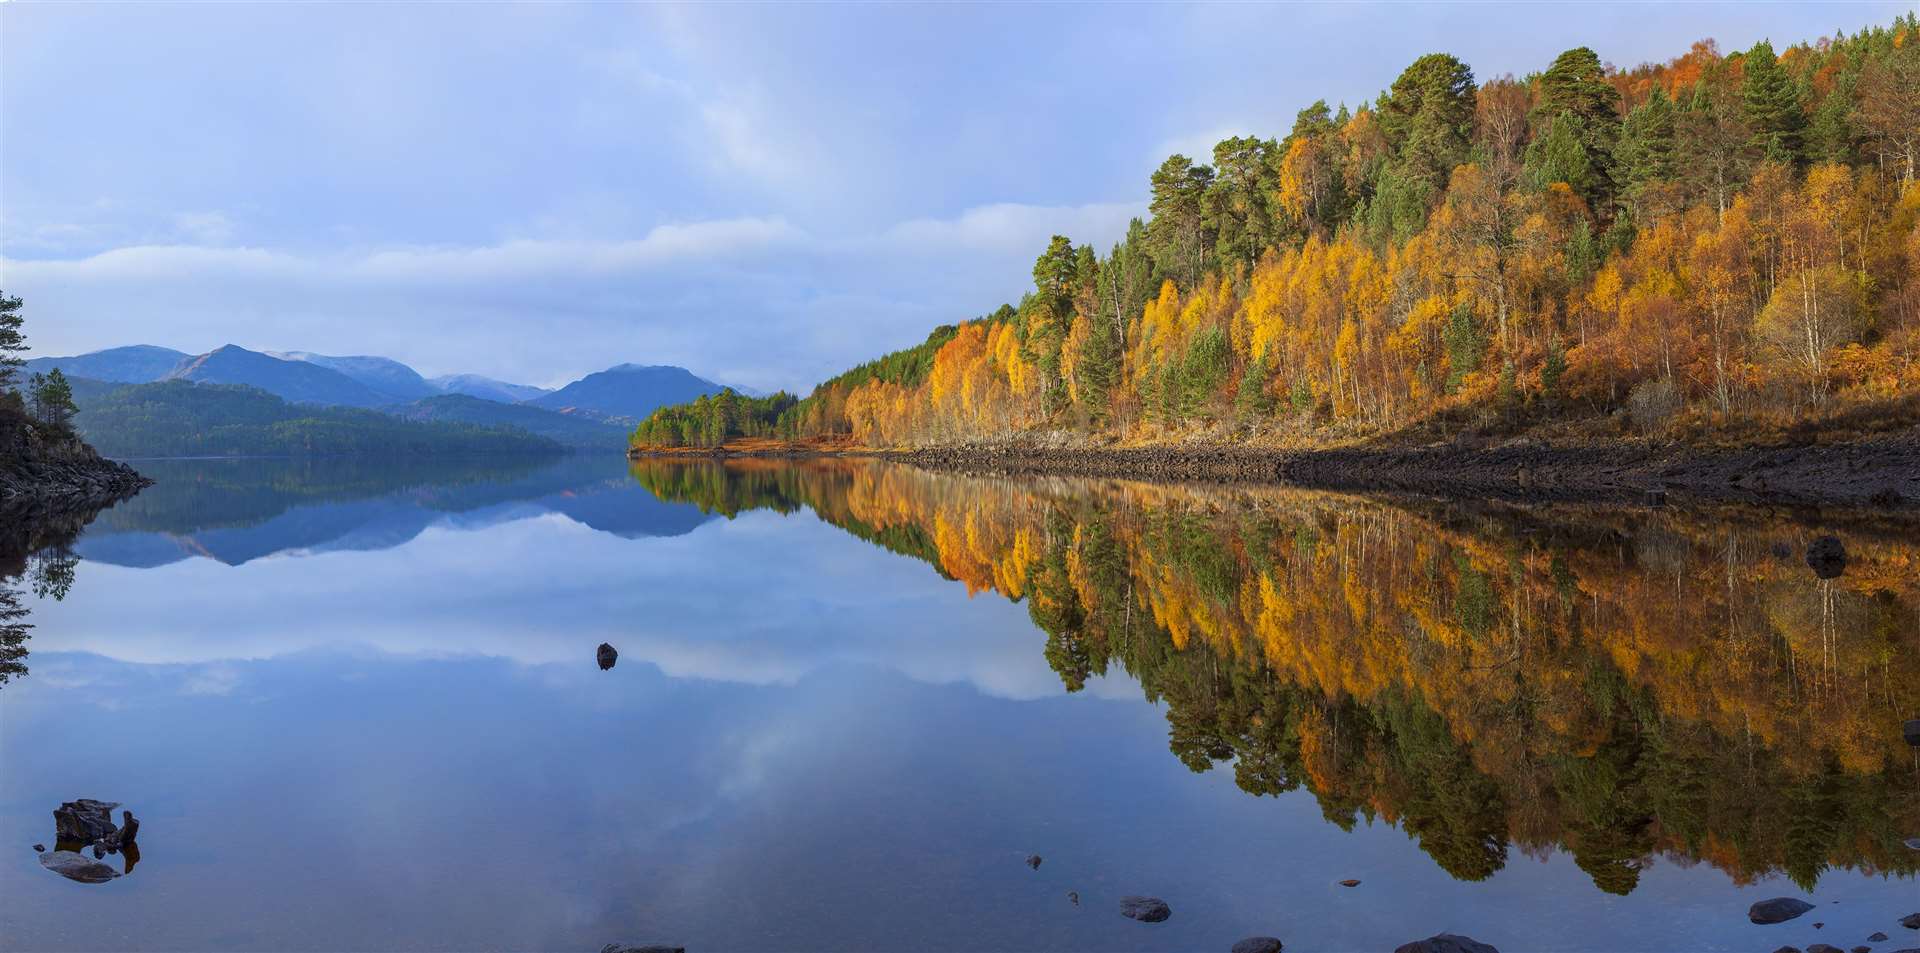 Glen Affric. Picture by: Grant Willoughby